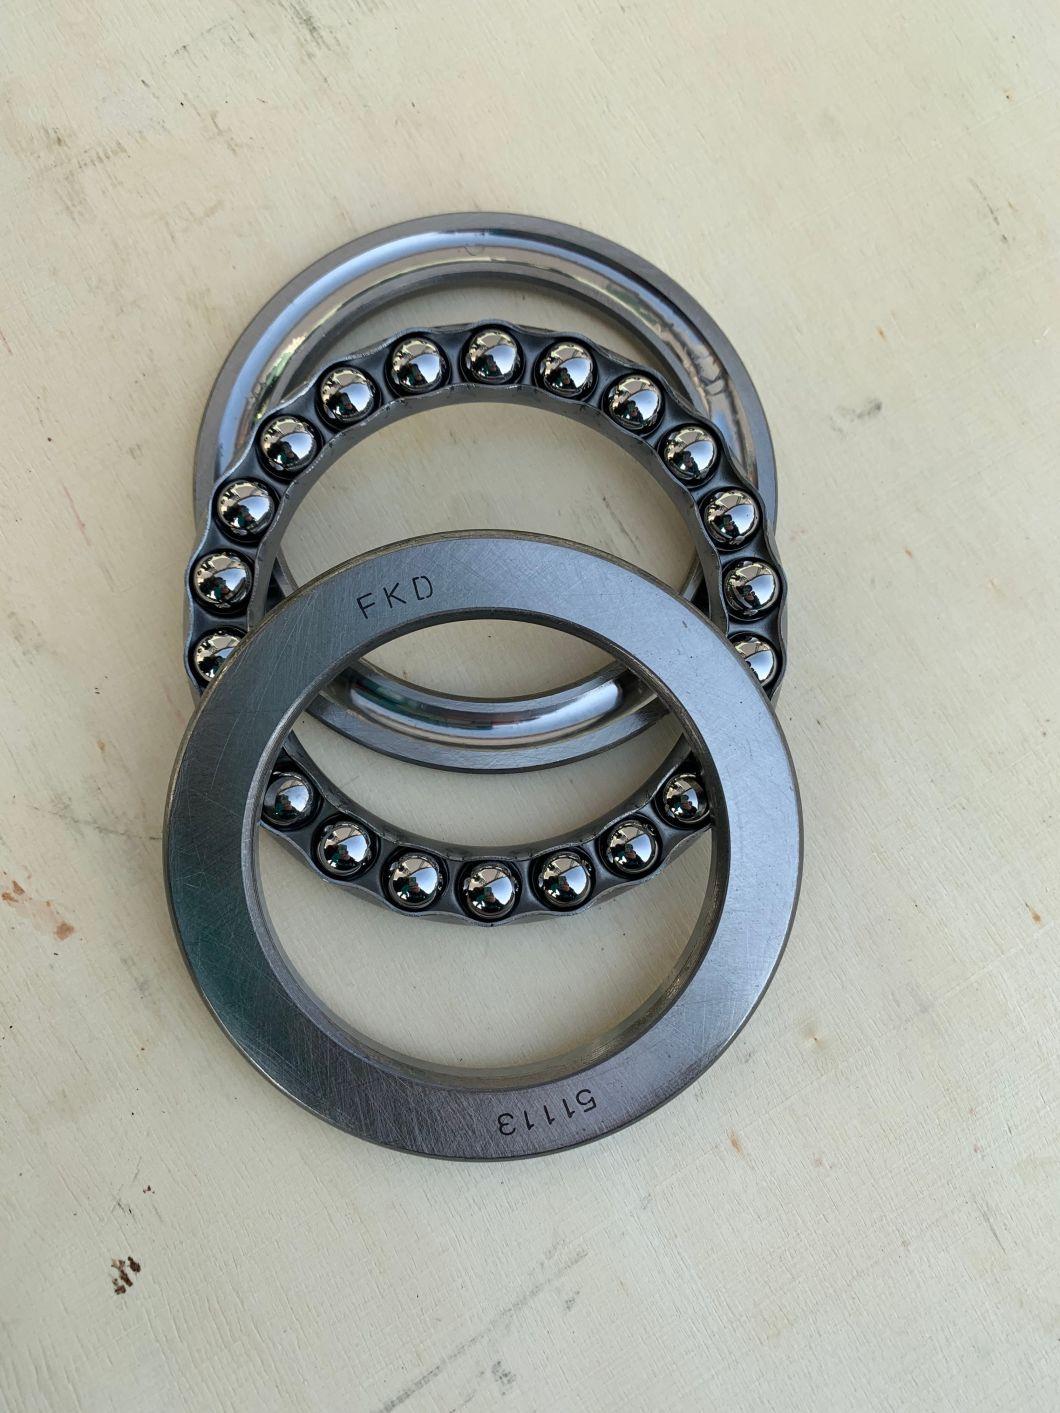 Hhb/Fe/Fkd Bearing Company, Gcr15 for Bearing, G10 for Steel Ball, Roller Bearing for Auto Parts (22206 22207 22208 22212)